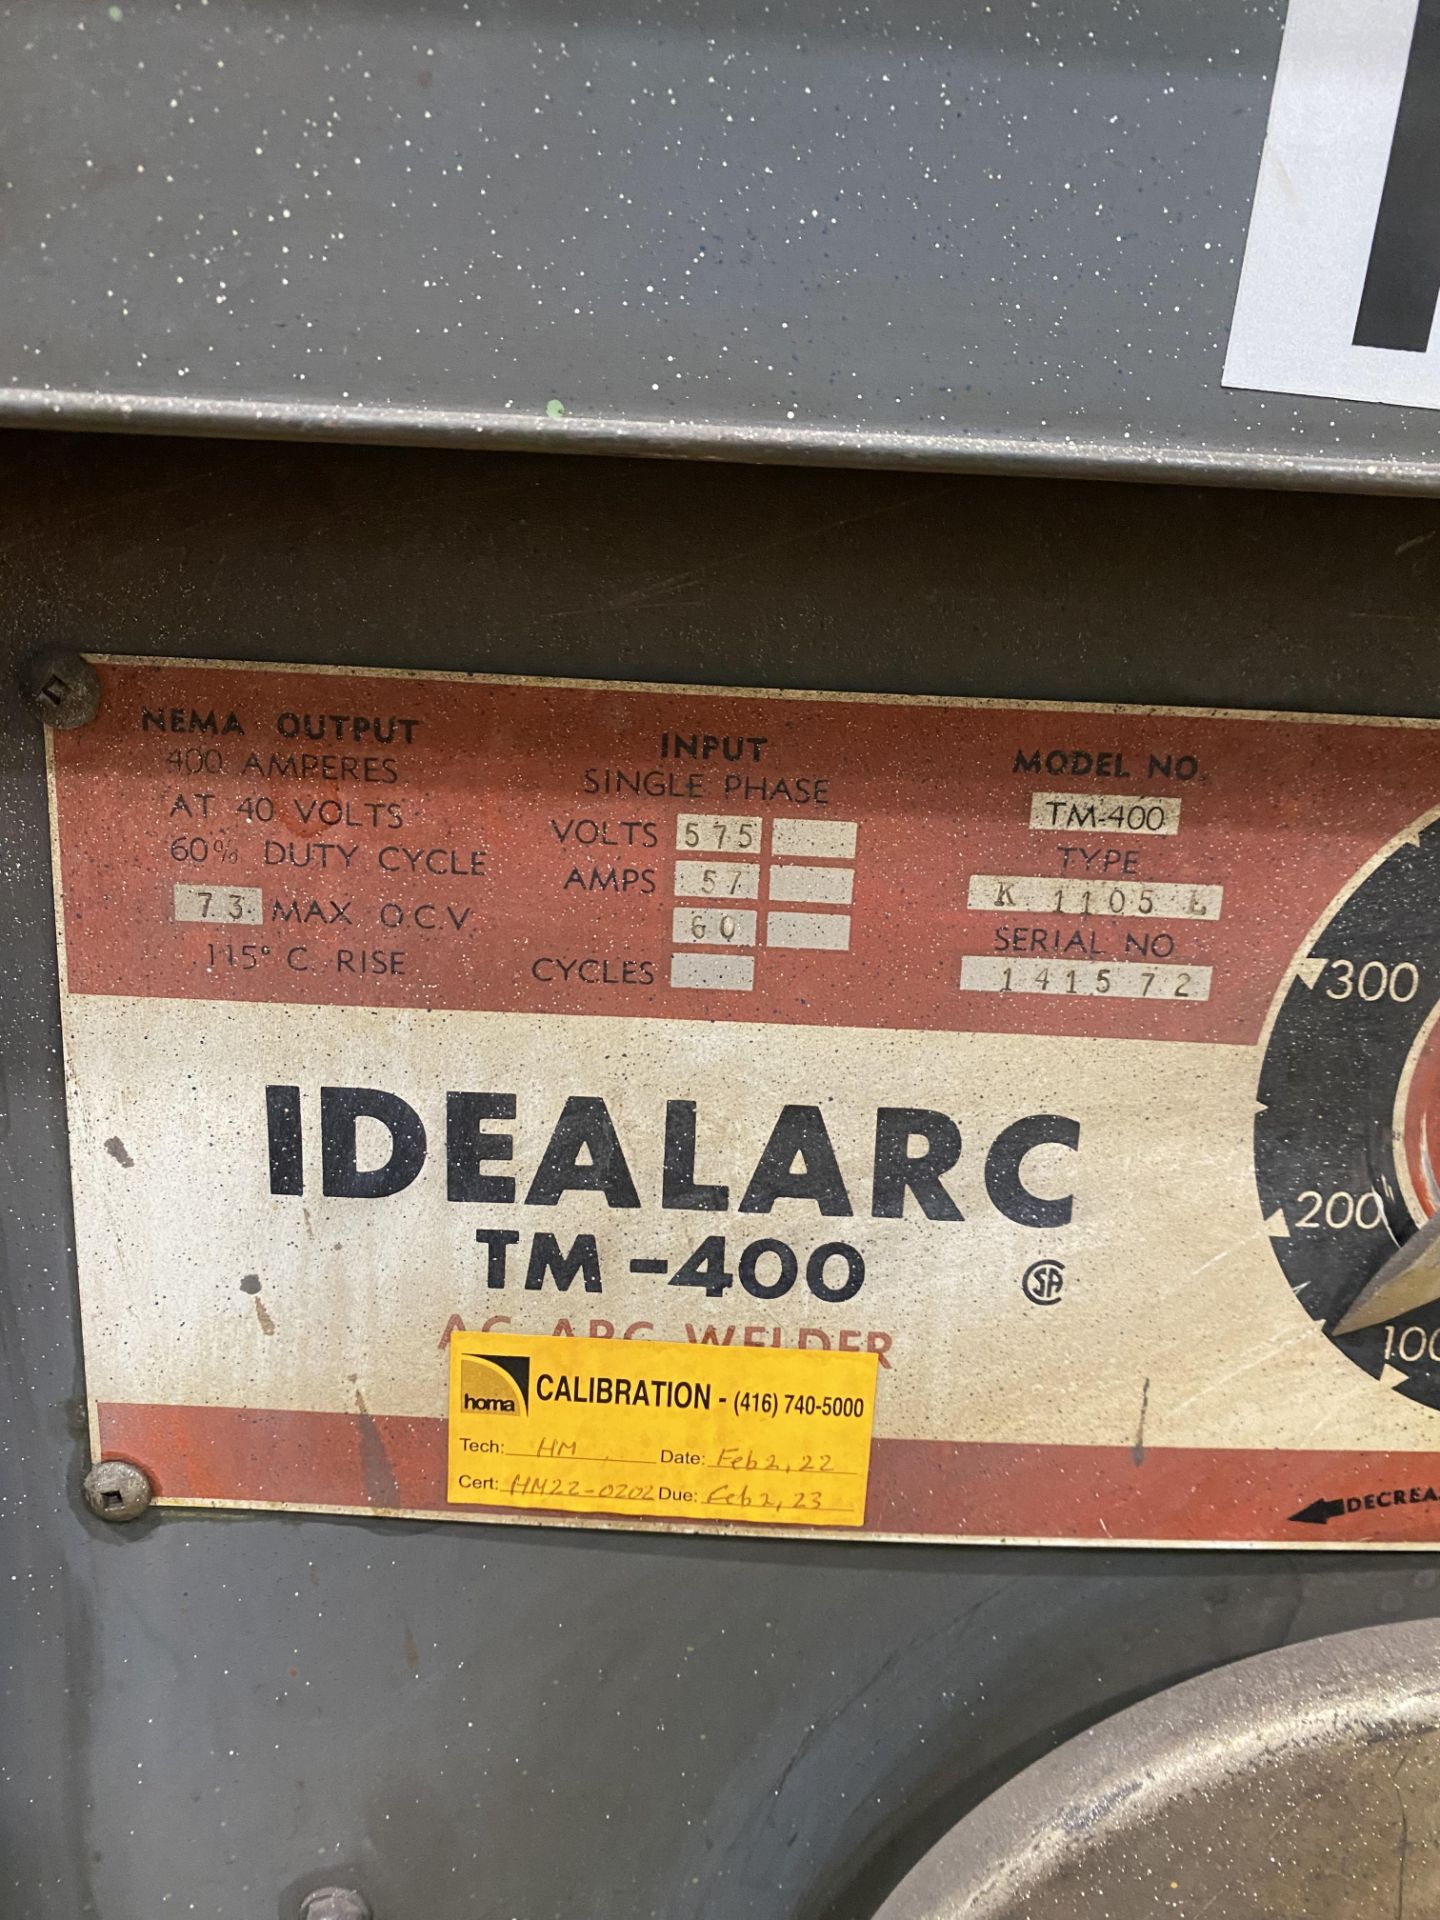 LINCOLN ELECTRIC IDEALARC TM-400 AC ARC WELDER - Image 2 of 2